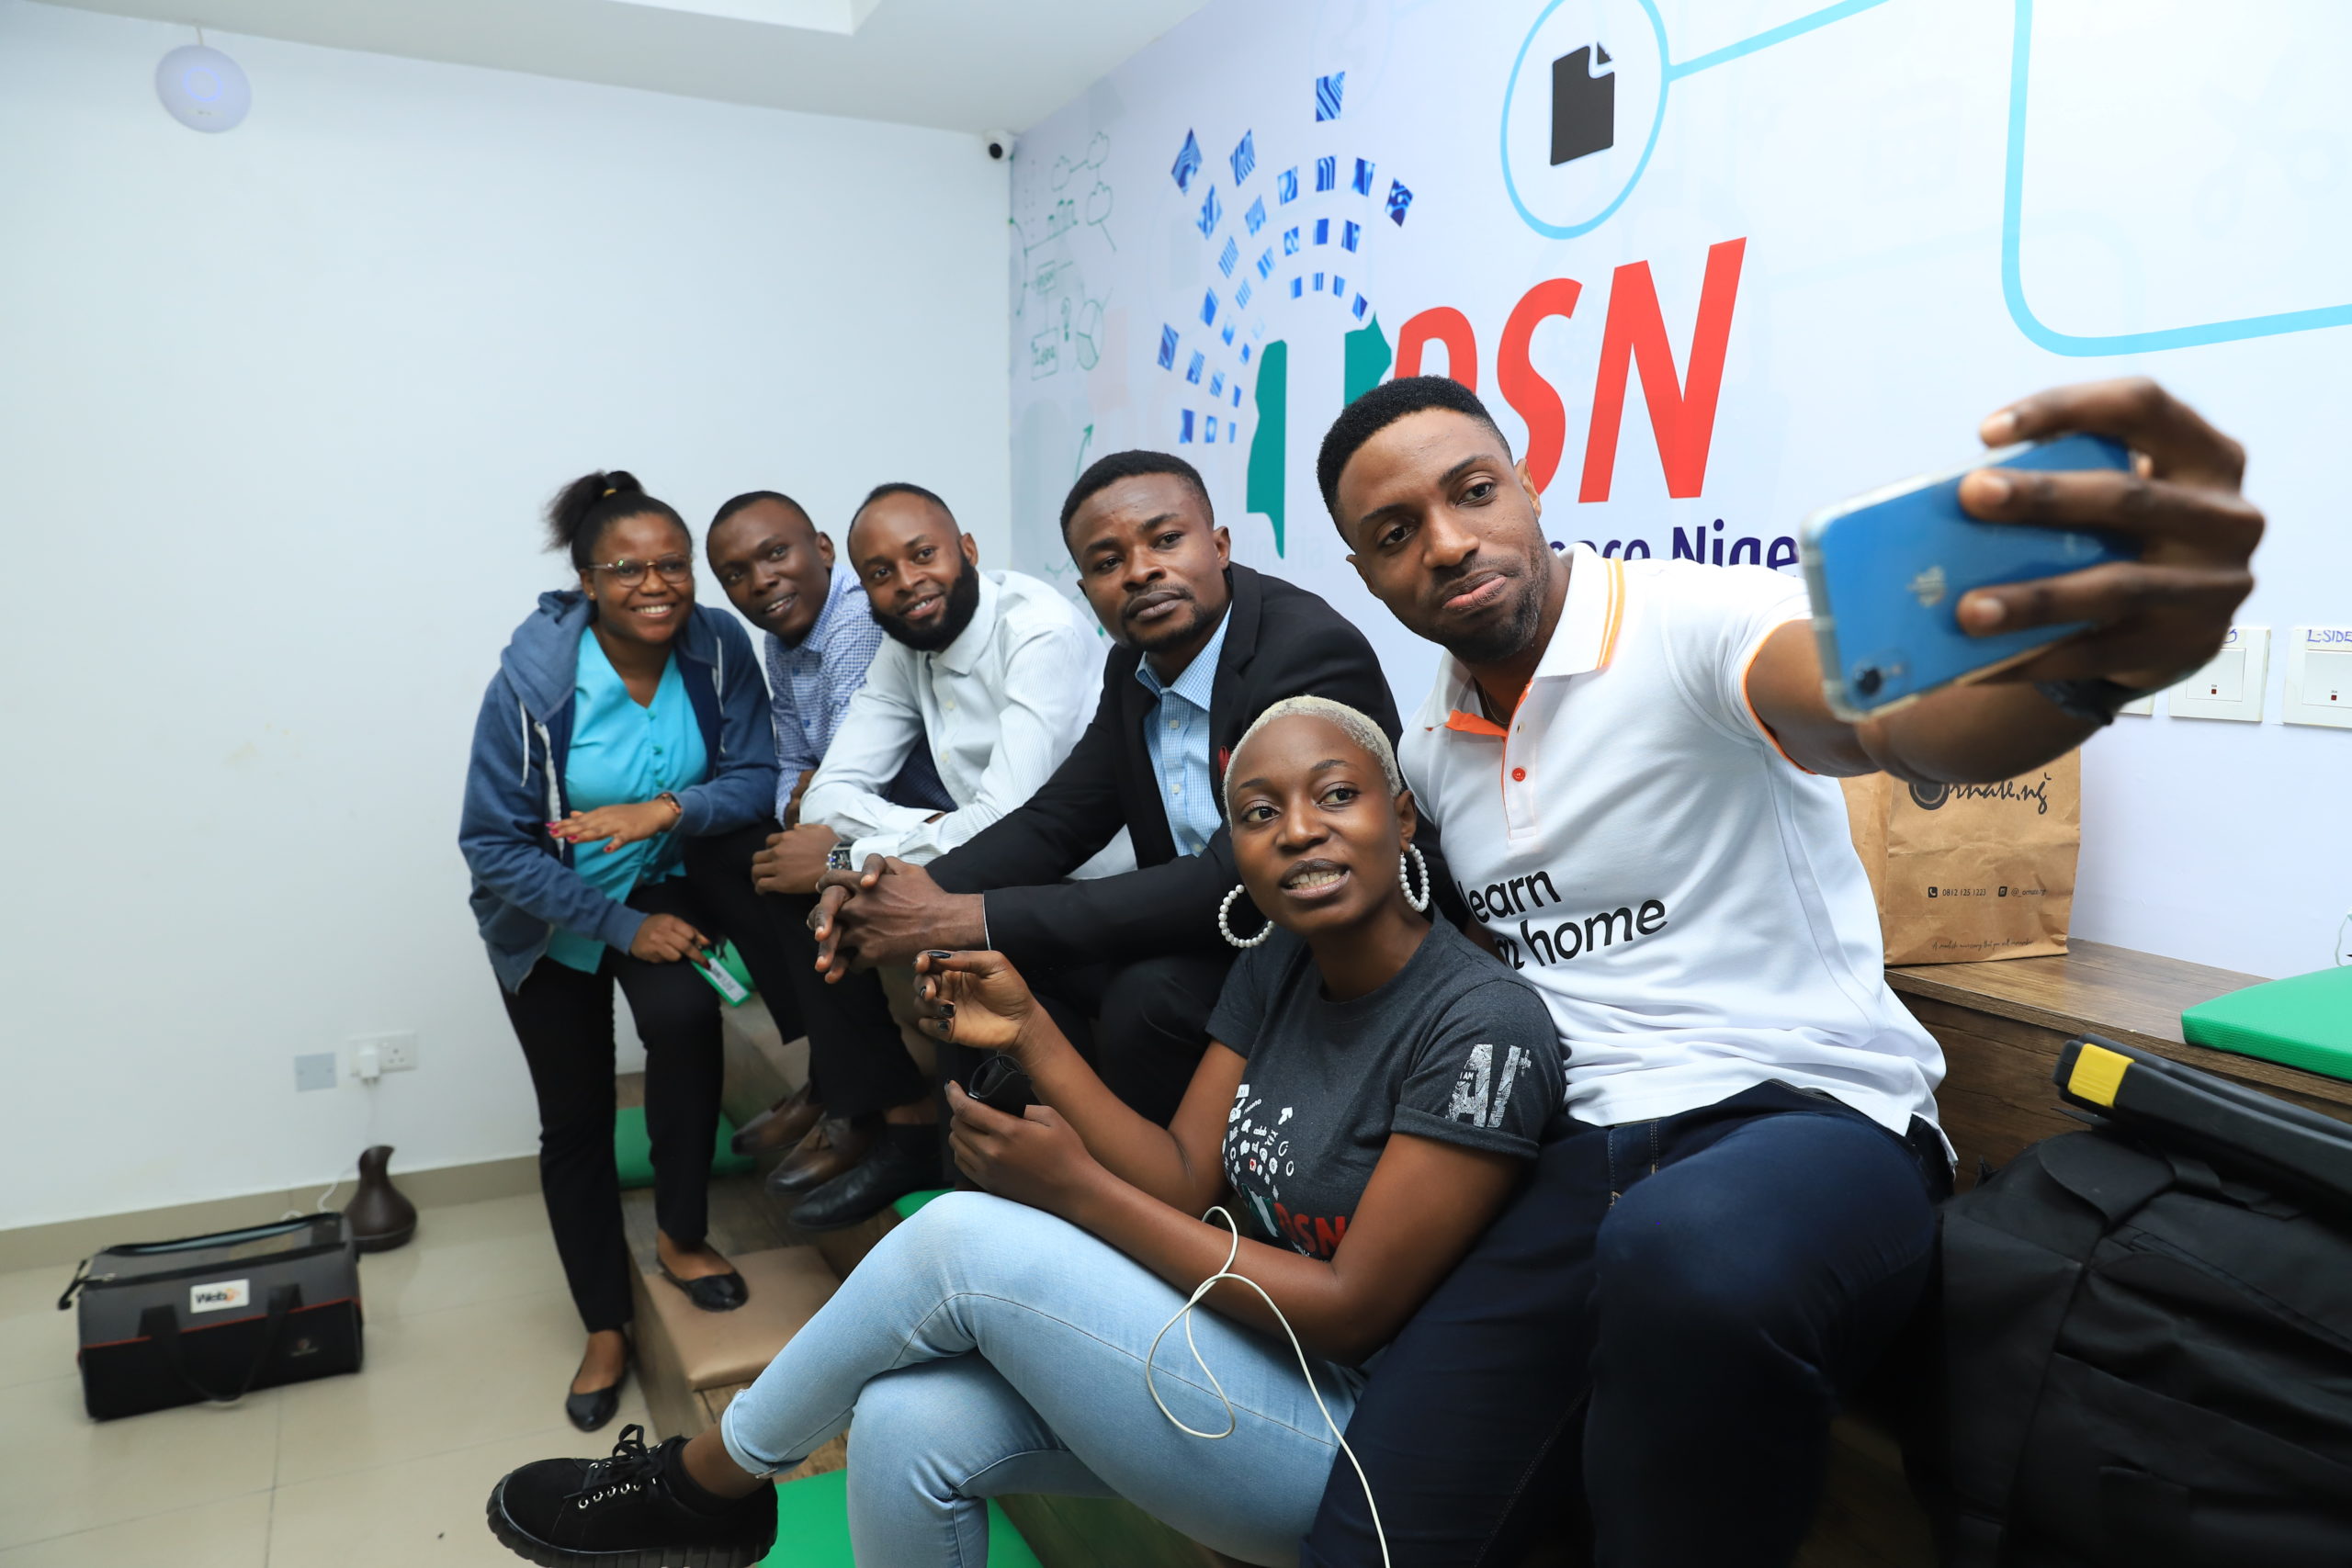 Data Science Nigeria is using AI to build wealth for the underserved